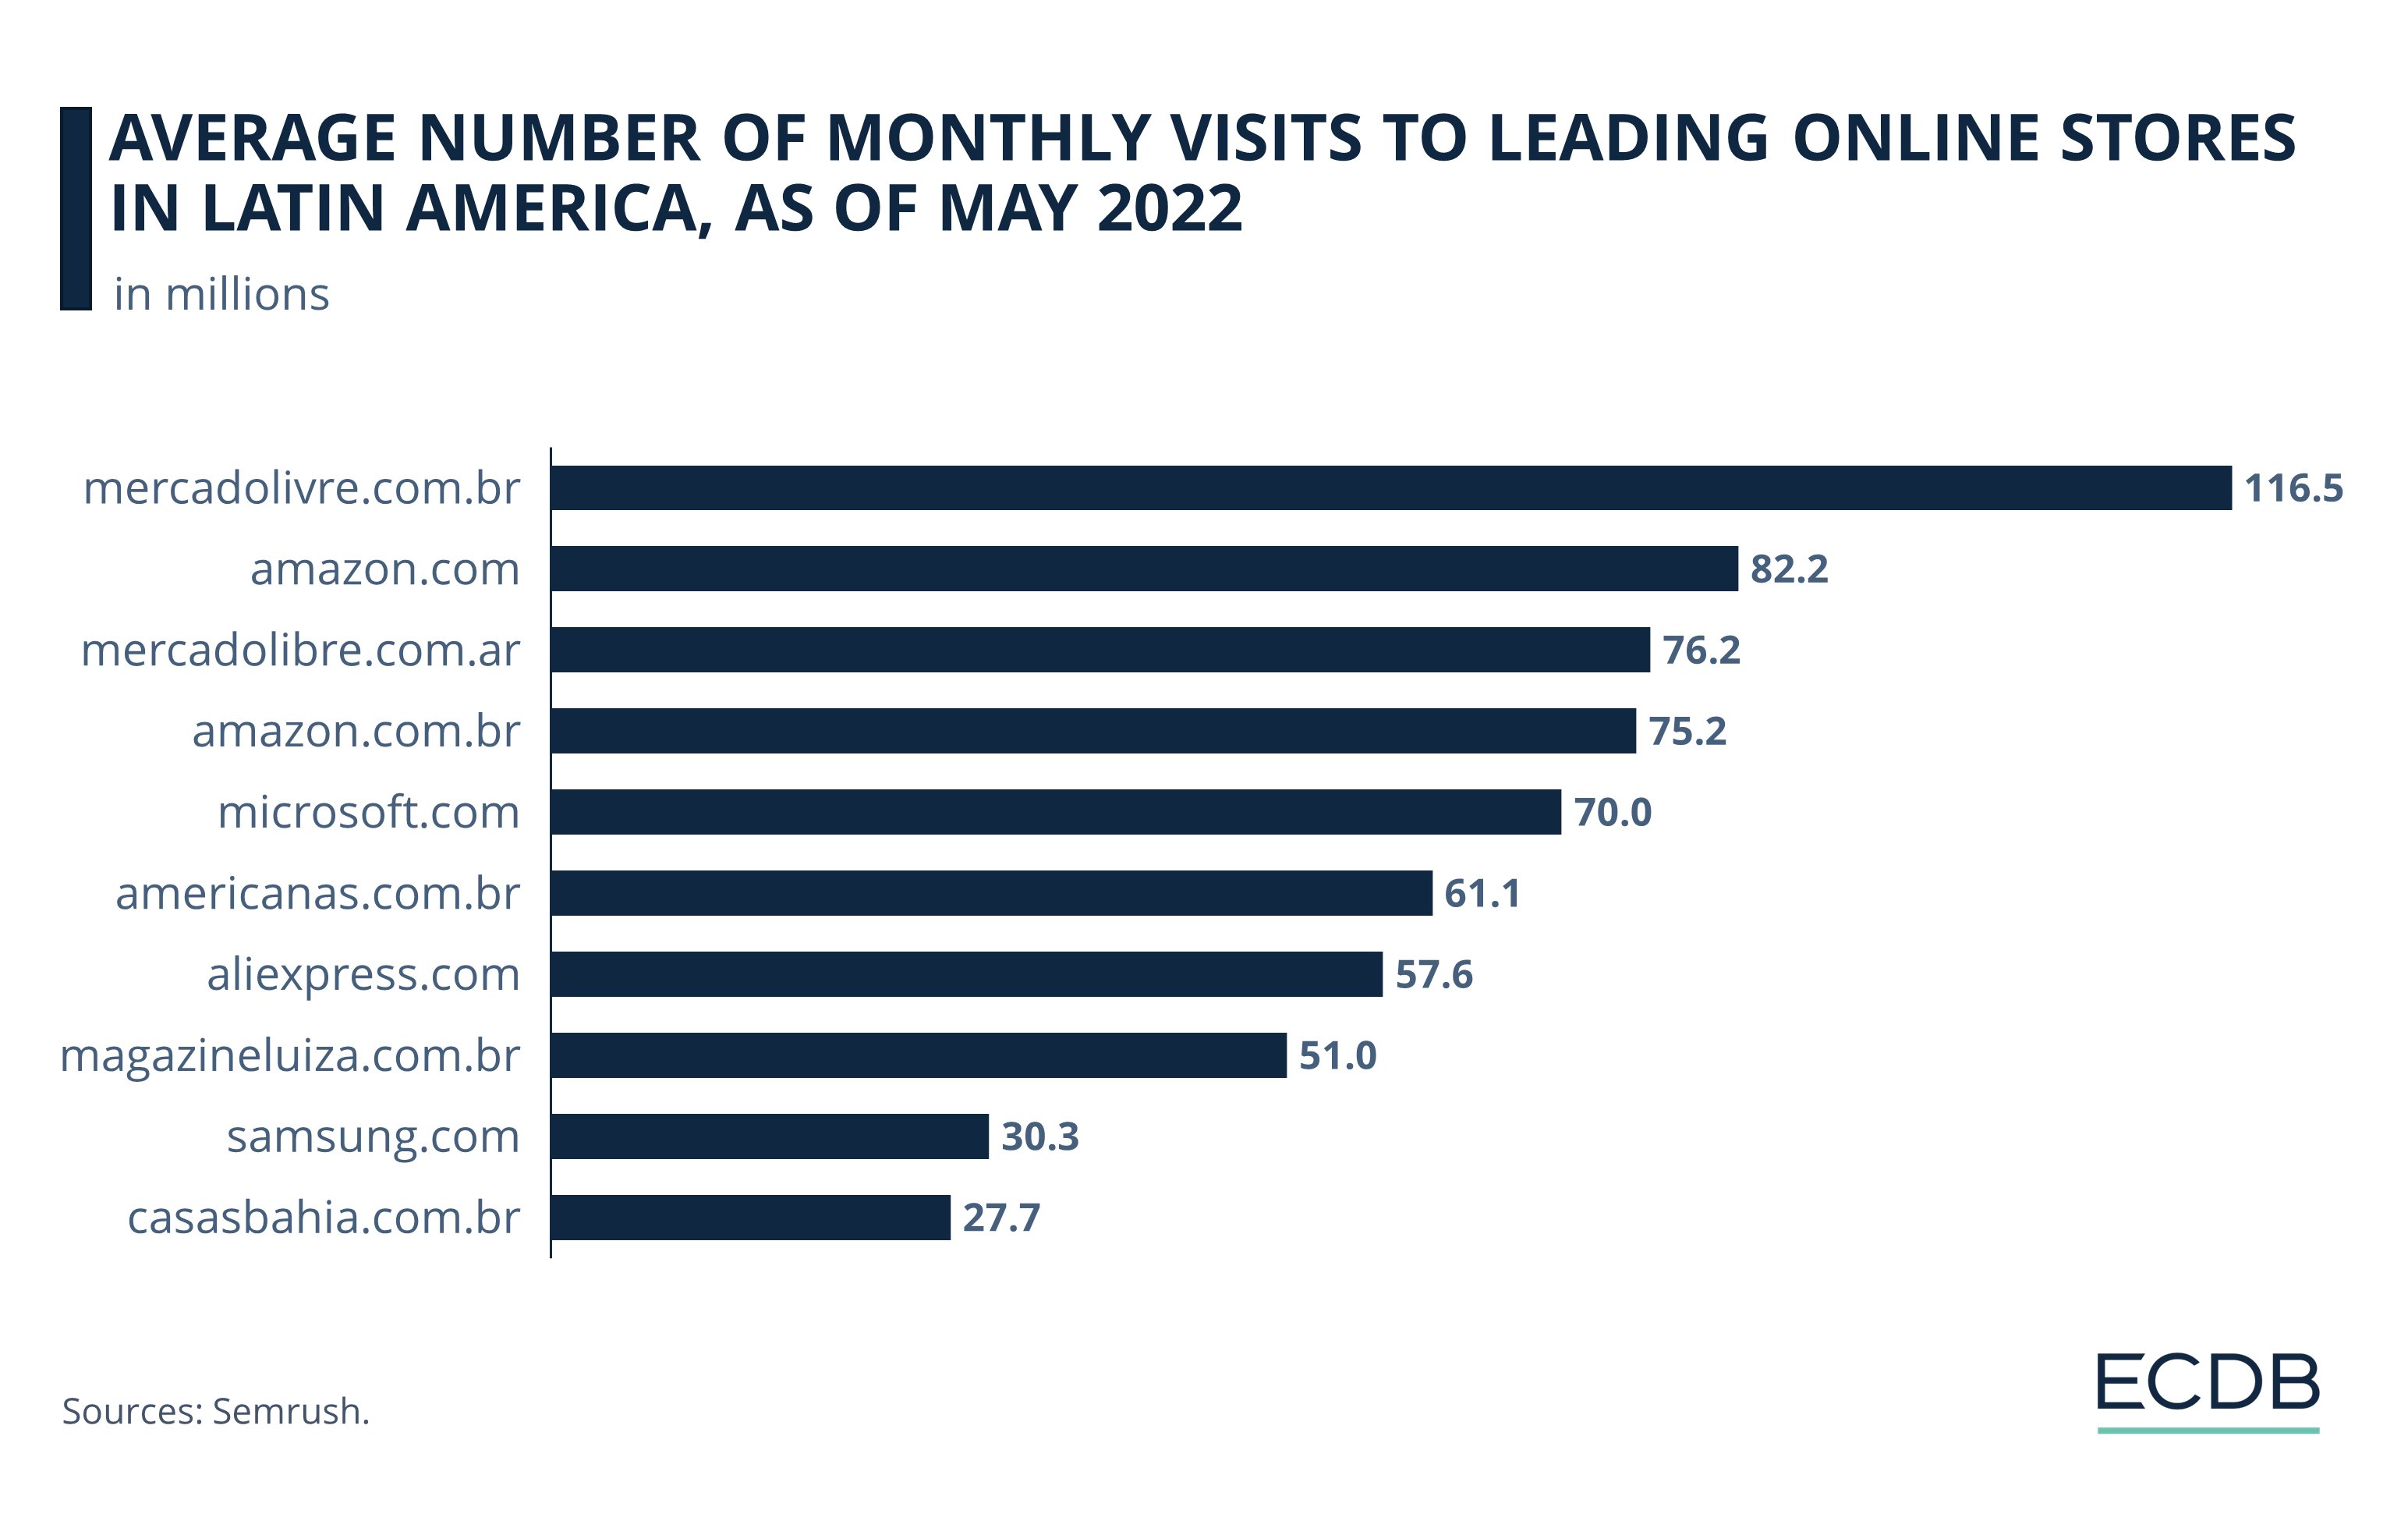 Average Number of Monthly Visits to Leading Online Stores in Latin America, as of May 2022